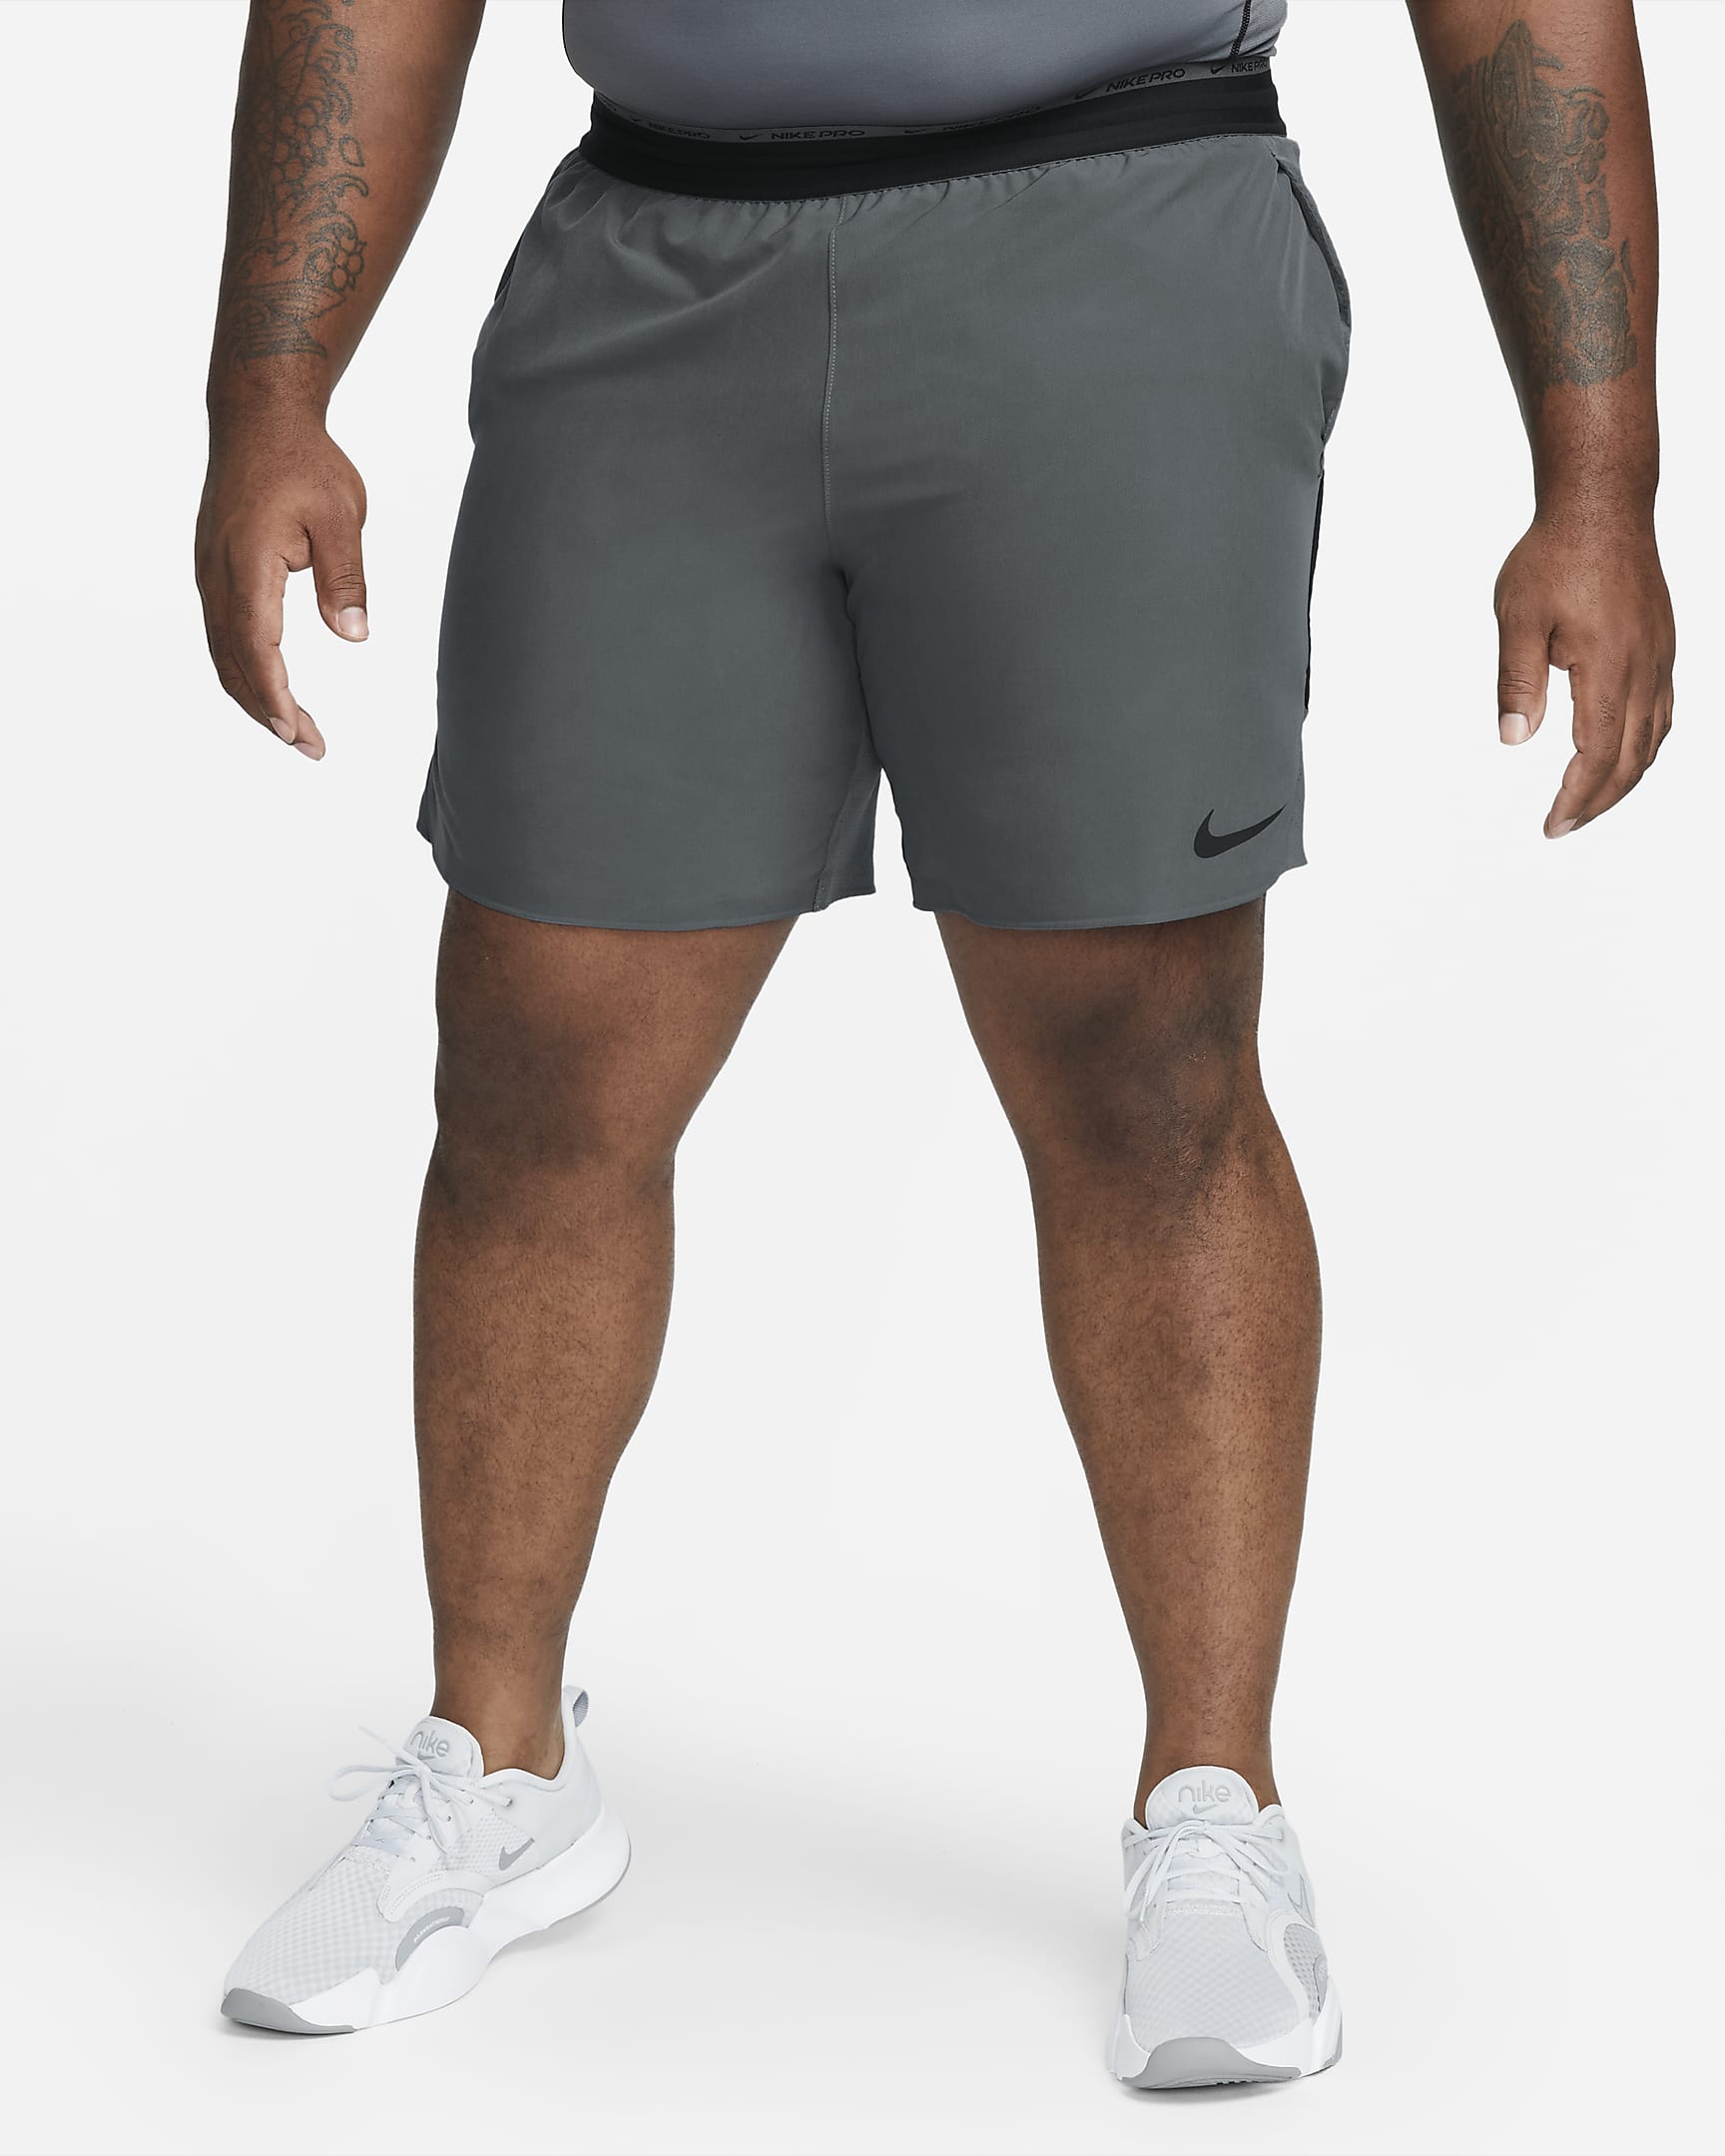 Nike Dri-FIT Flex Rep Pro Collection Men's 20cm (approx.) Unlined Training Shorts - Iron Grey/Black